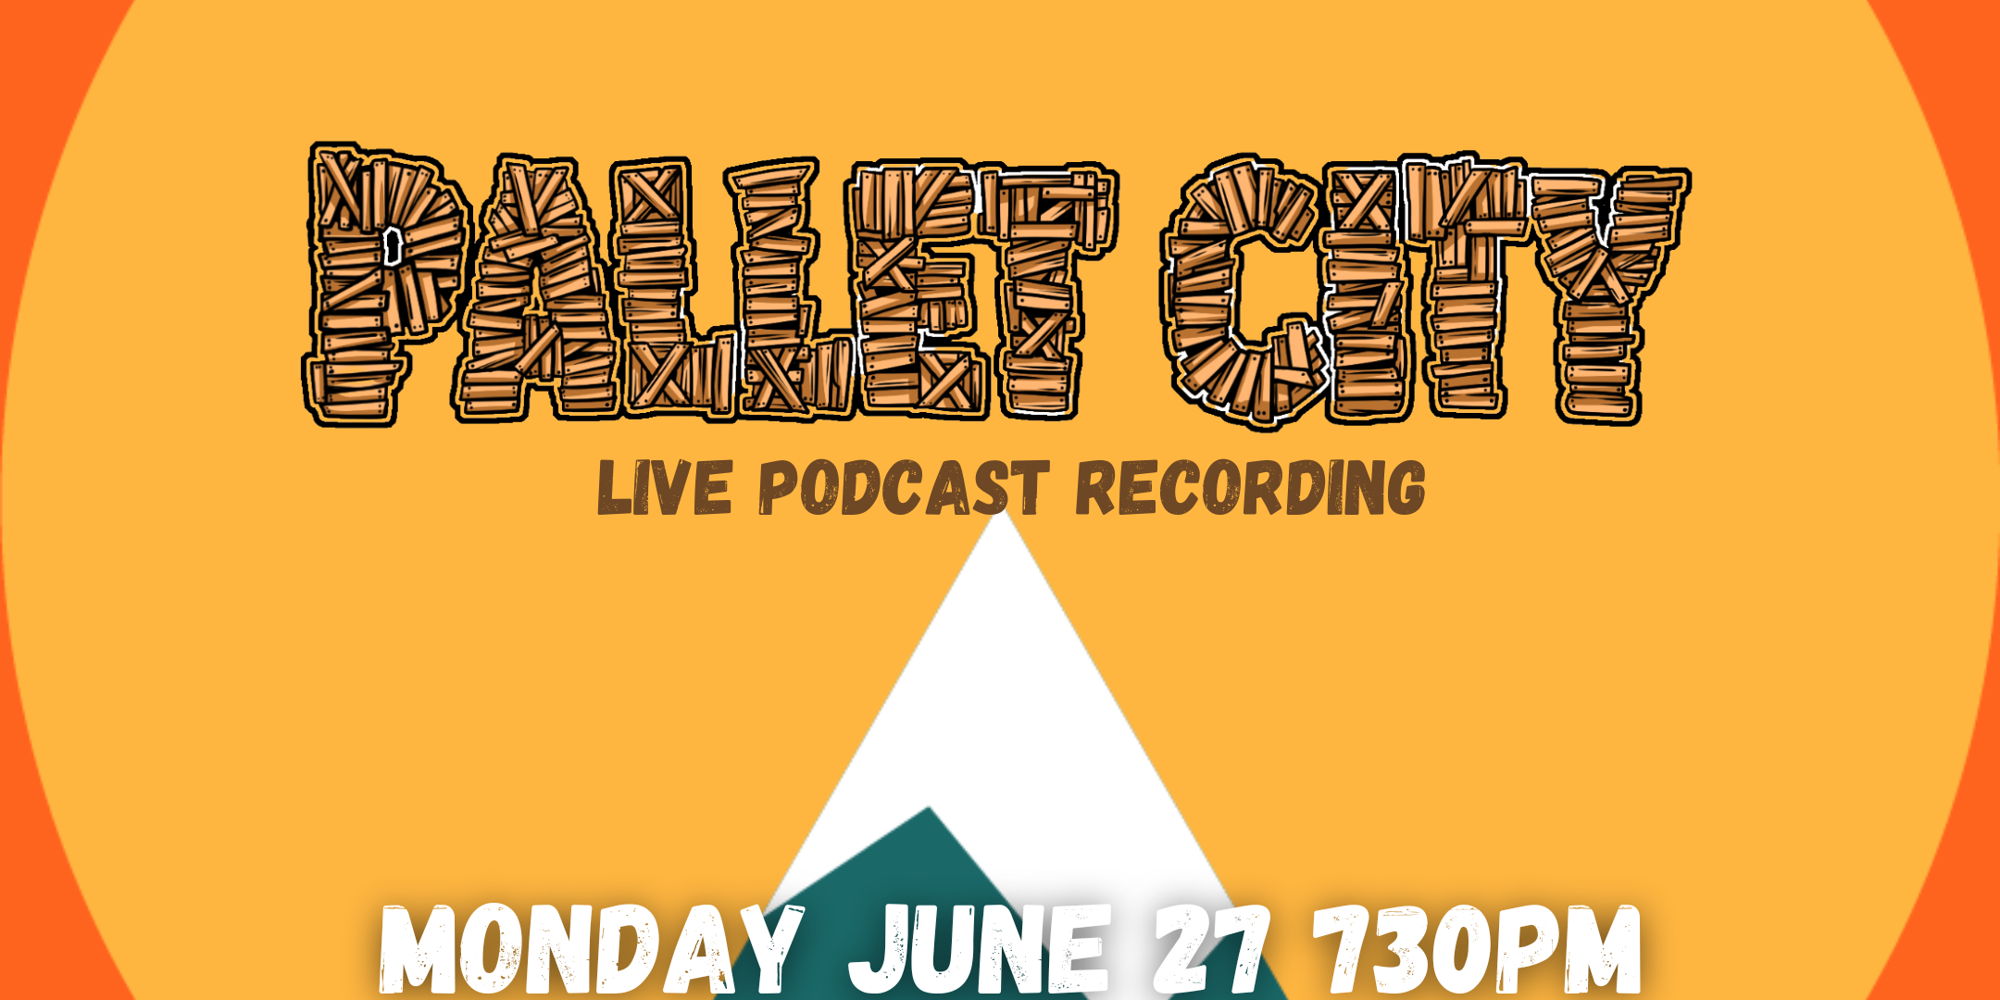 Pallet City Live Podcast Recording at Western Sky Bar & Taproom promotional image